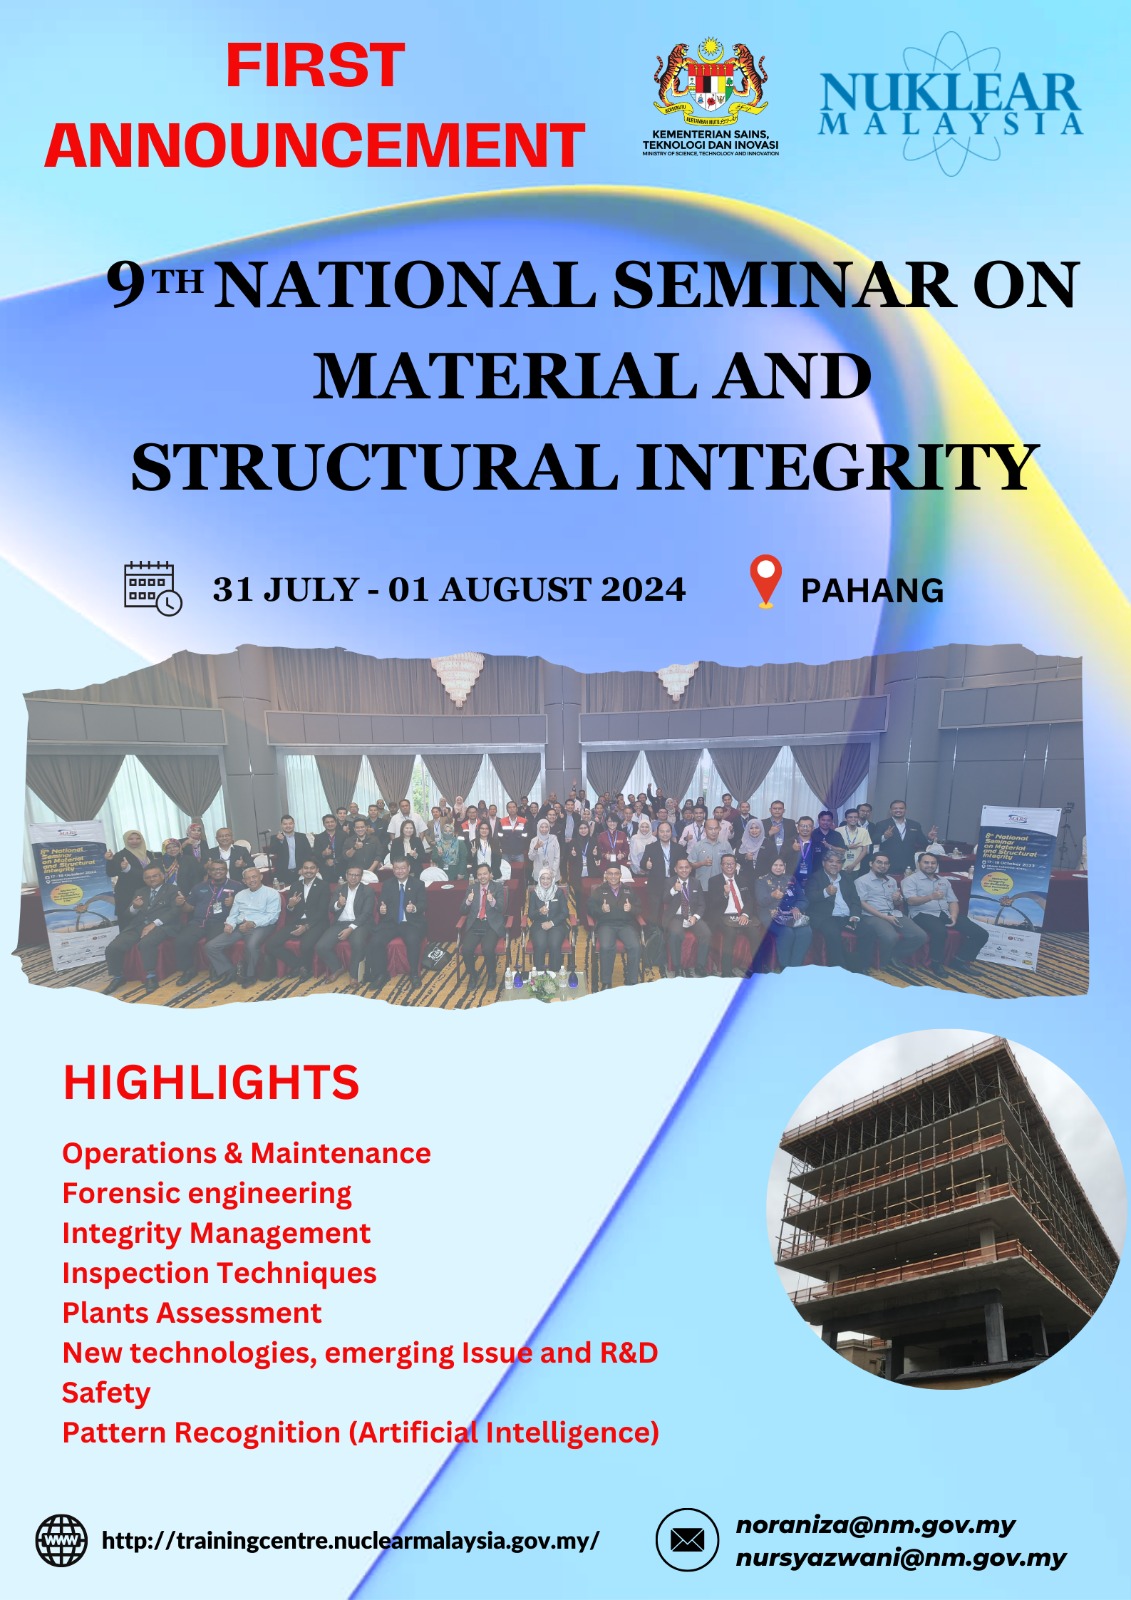 9TH NATIONAL SEMINAR ON MATERIAL AND STRUCTURAL INTEGRITY